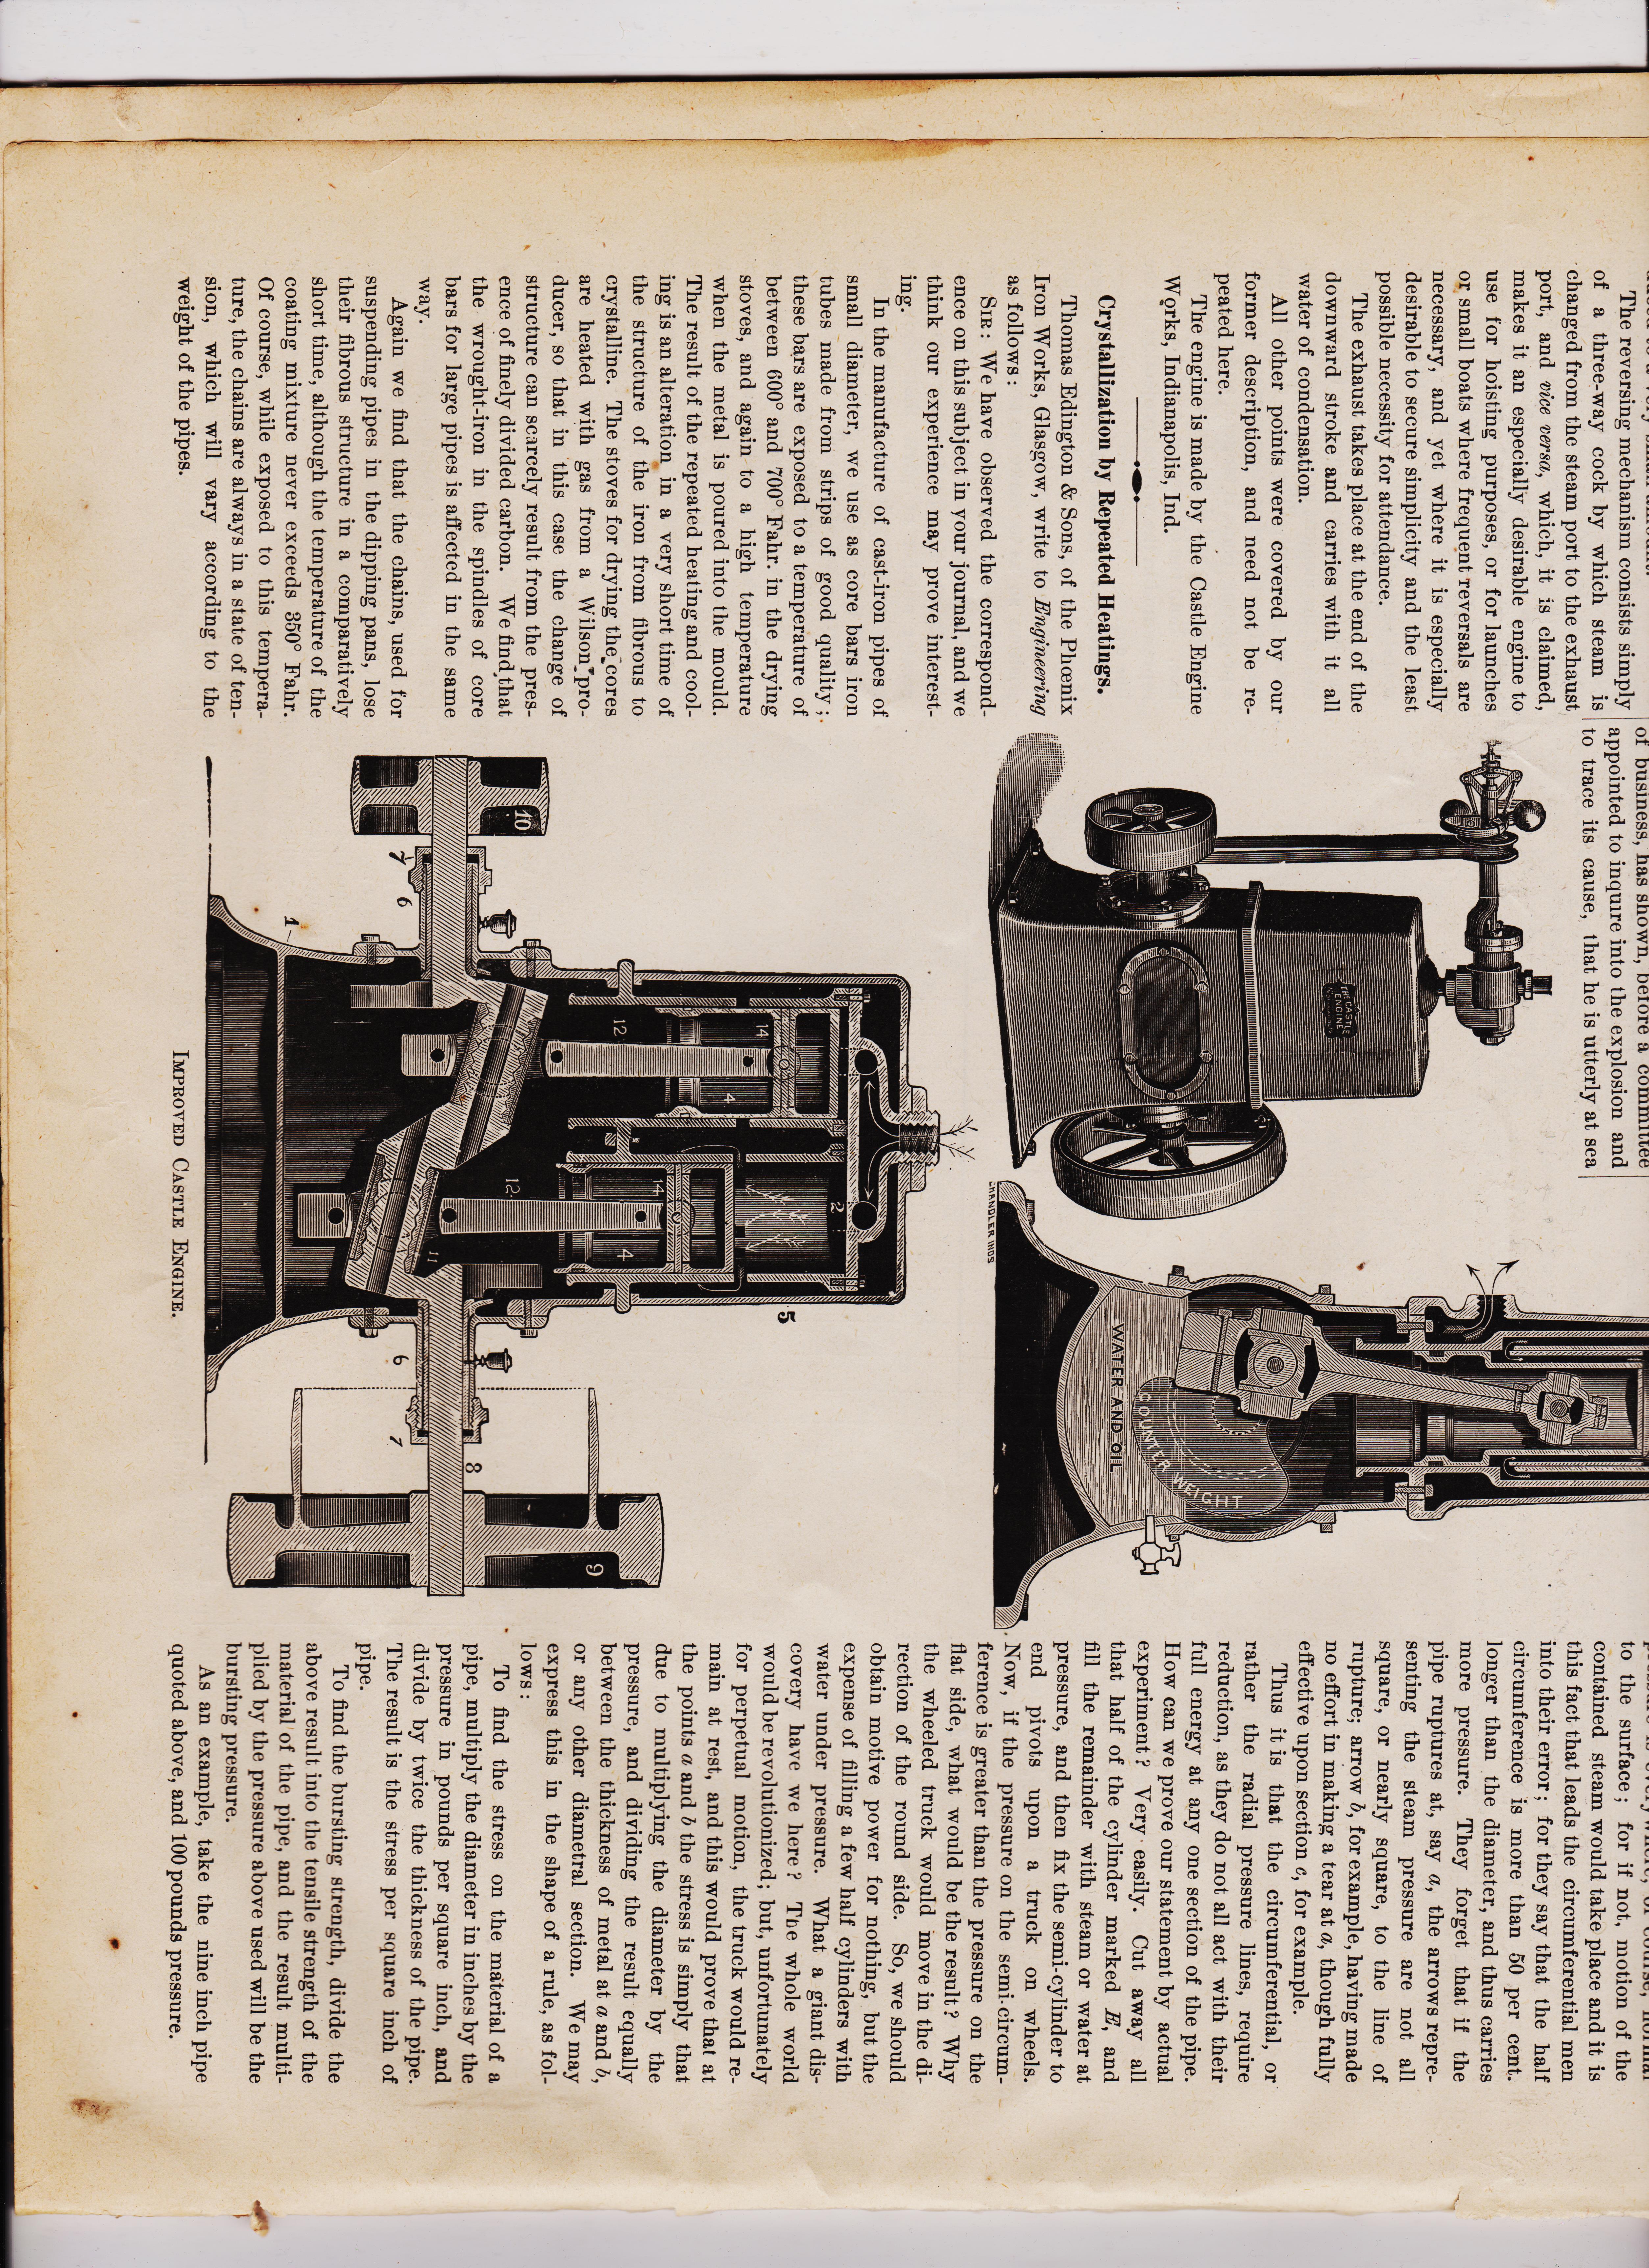 https://antiquemachinery.com/images-American-Machinist-Dec-17-1887/American-Machinist-Dec-17-1887-pg-4-bot-Improved-Castle-Engine-Resistance-to-Bursting-Pressure-of-cylidrical-Structures-Crystaliation-by-Repeated-Heating.jpeg